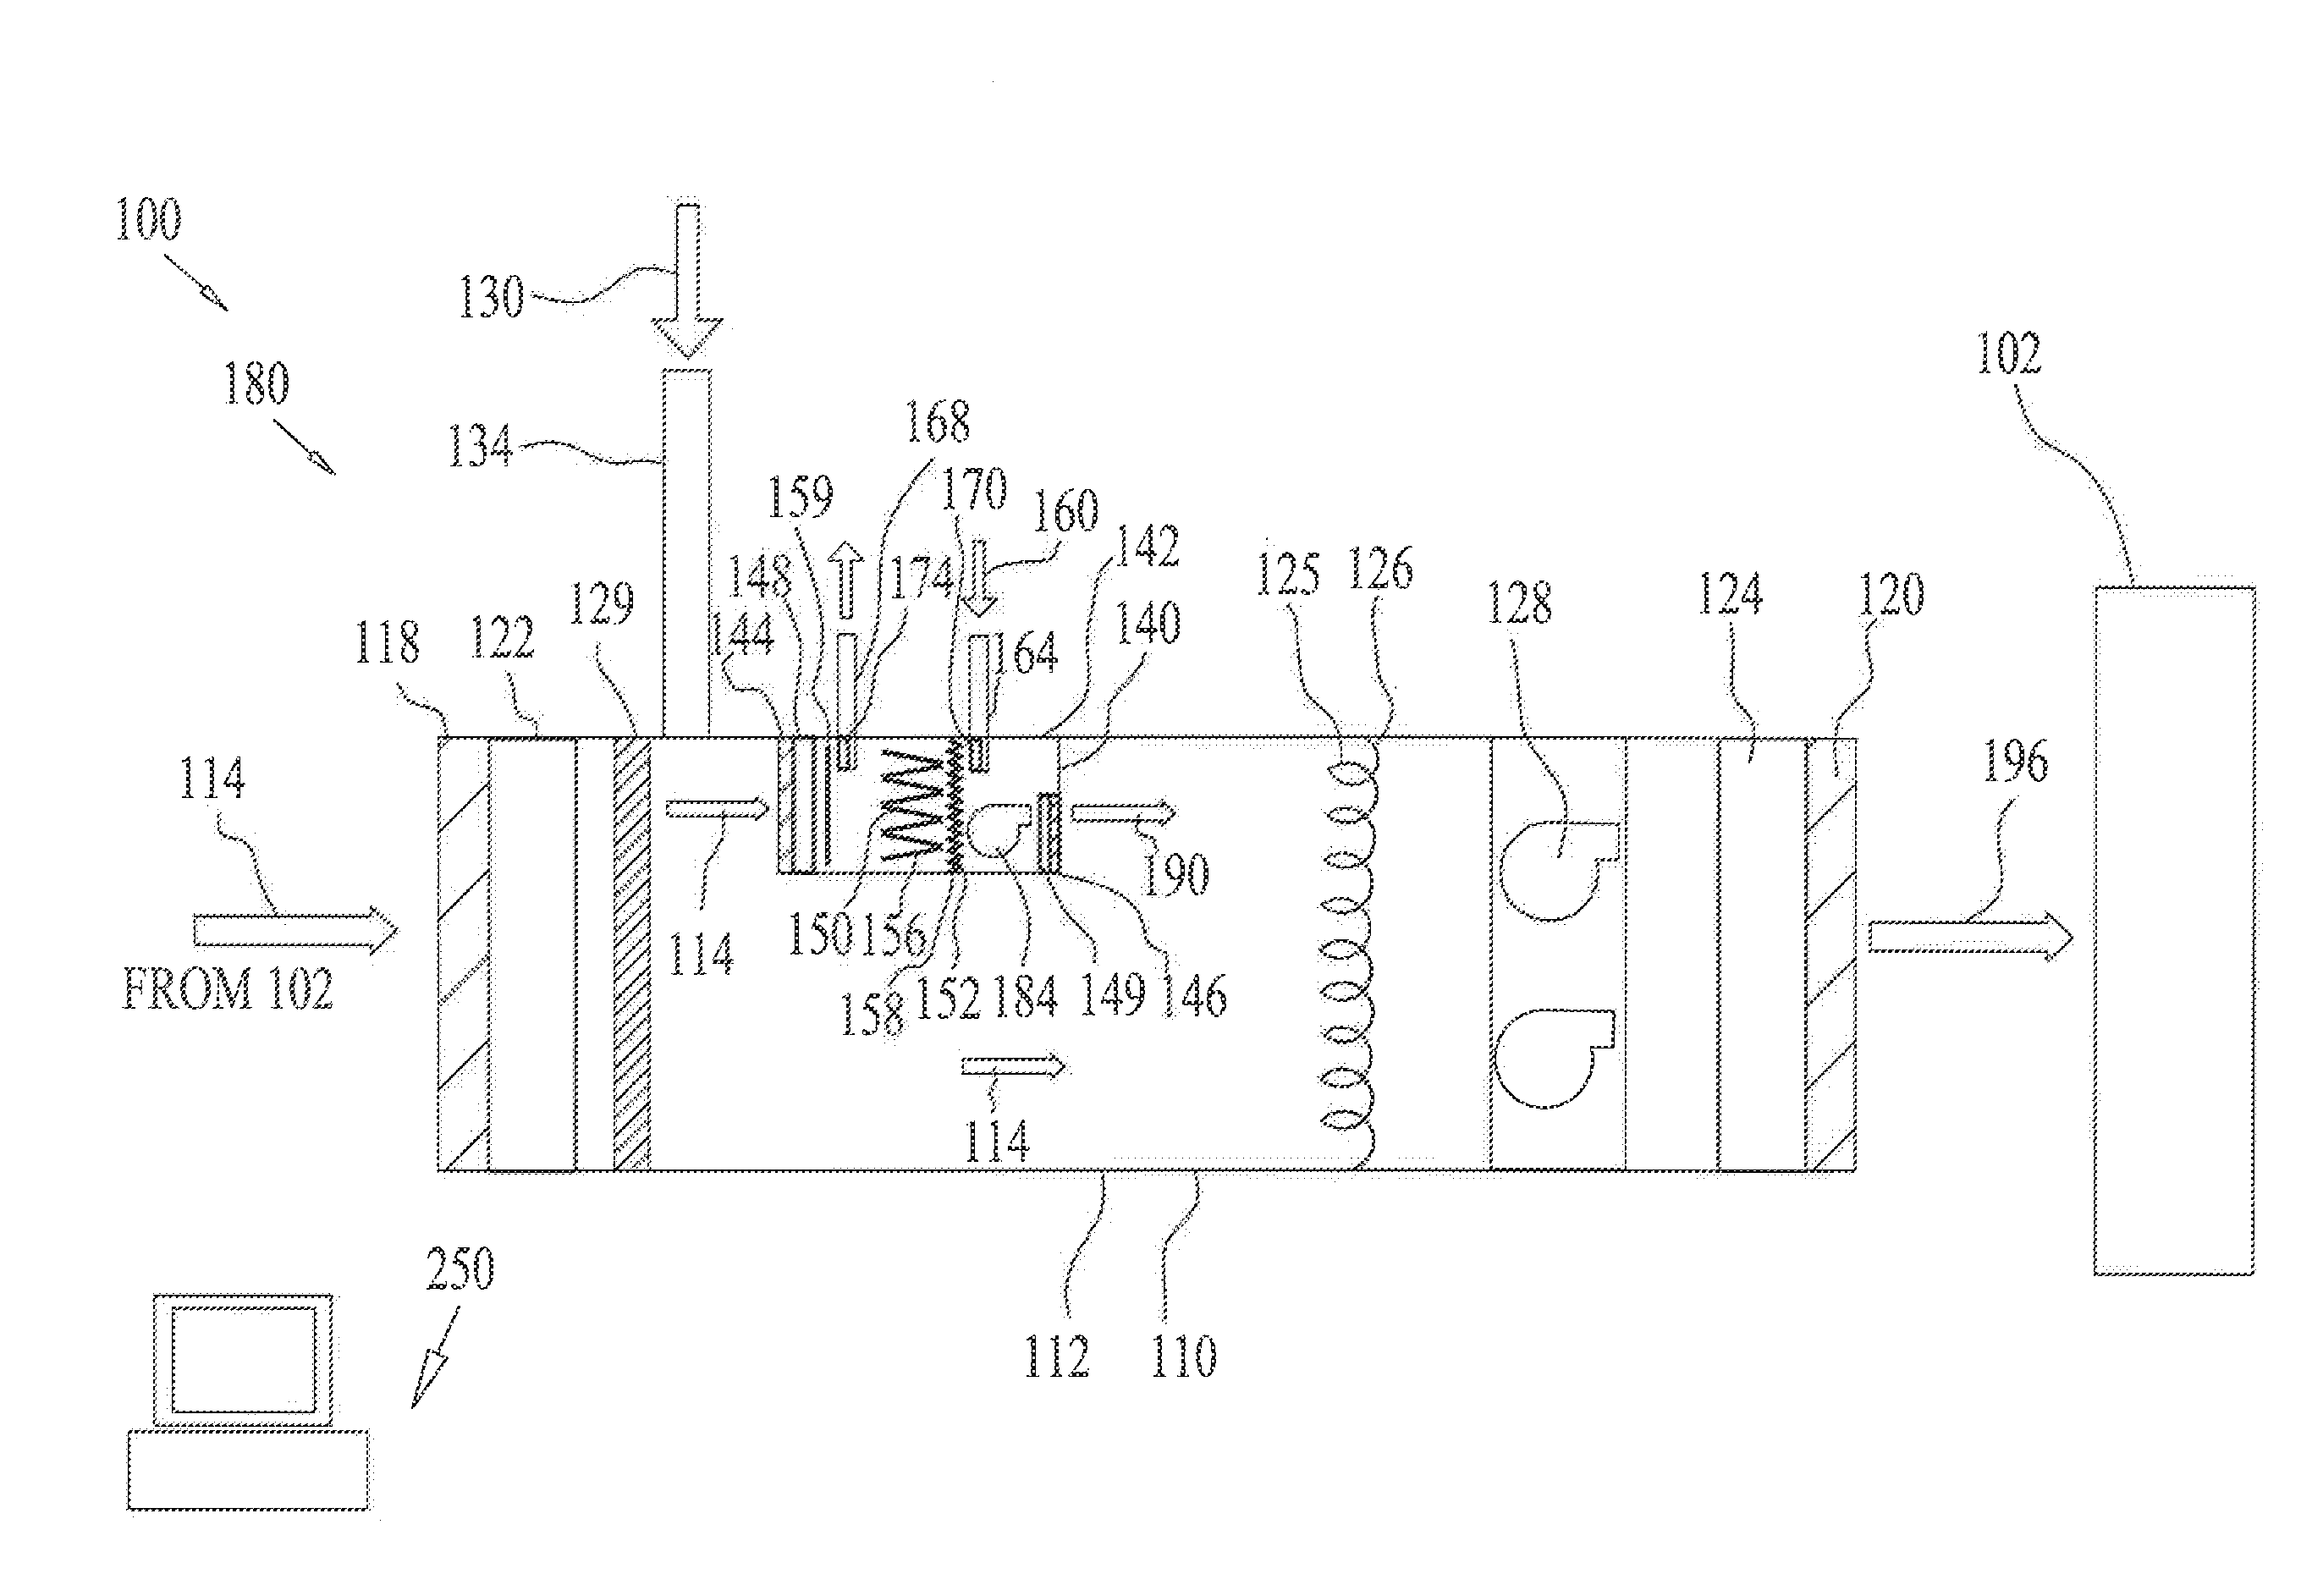 Air handling system with integrated air treatment